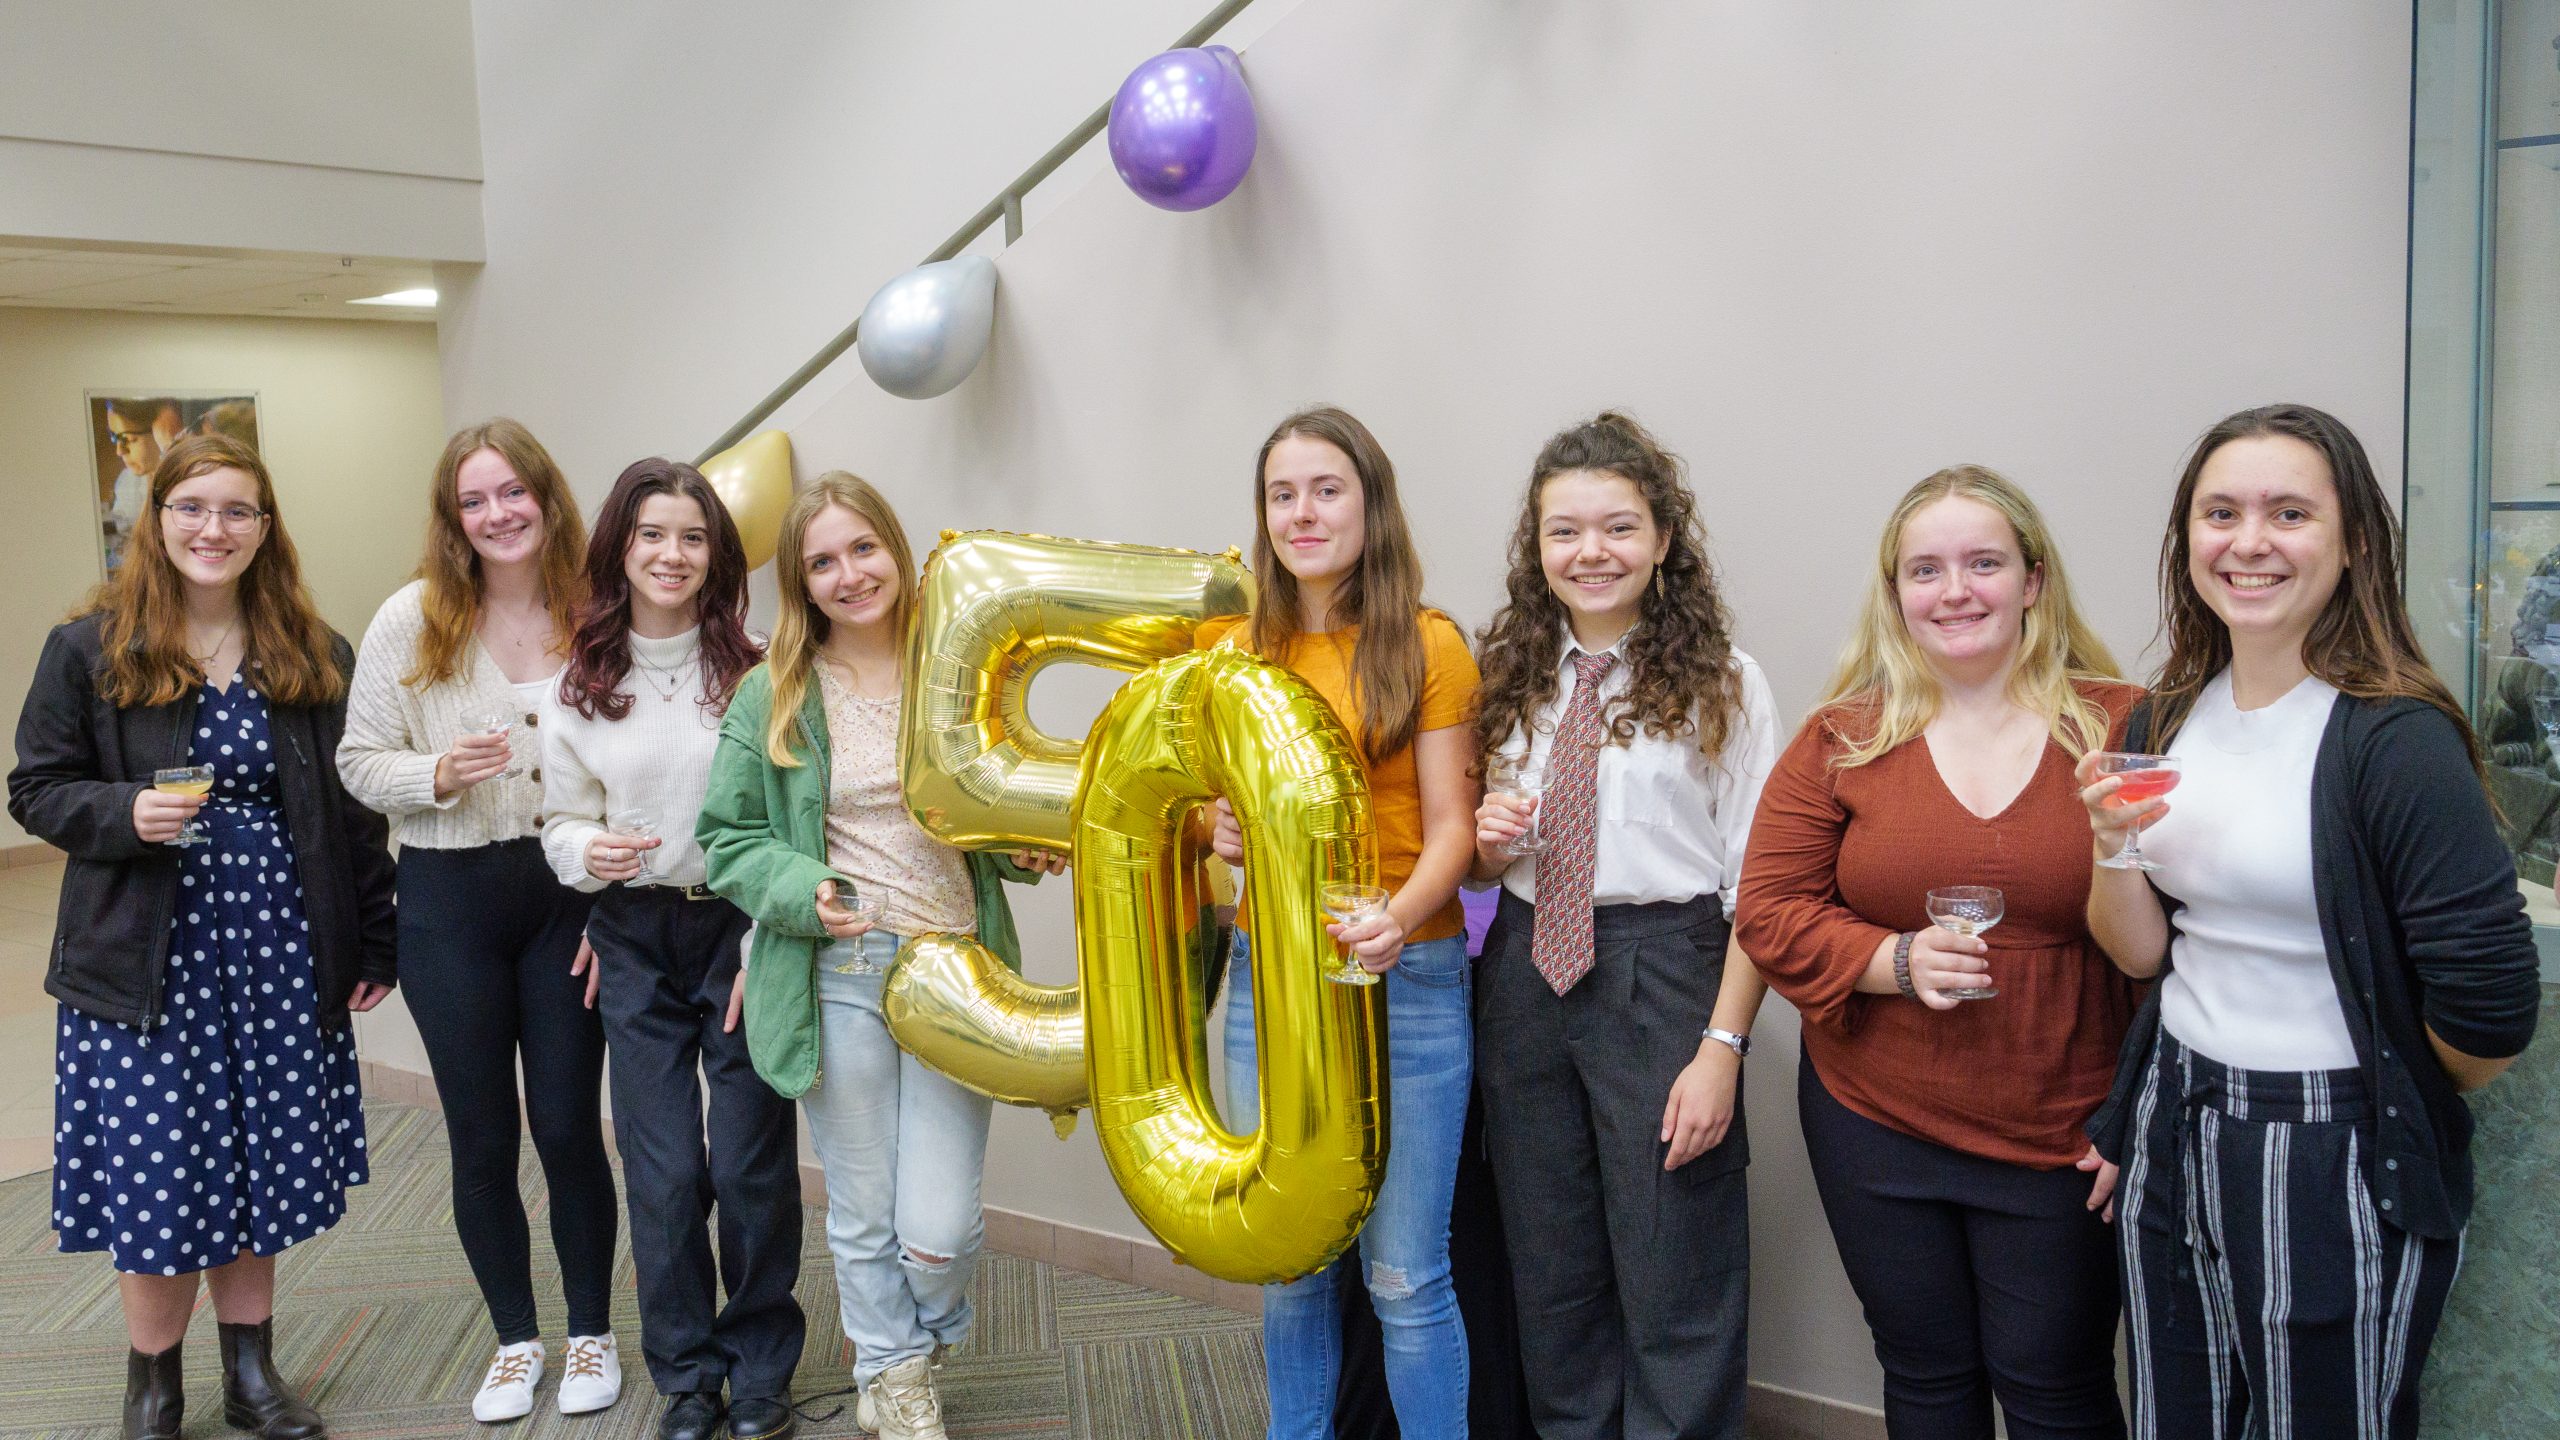 Eight women engineering students pose with an inflatable "50" during a celebration of 50 years of SWE at Clarkson.